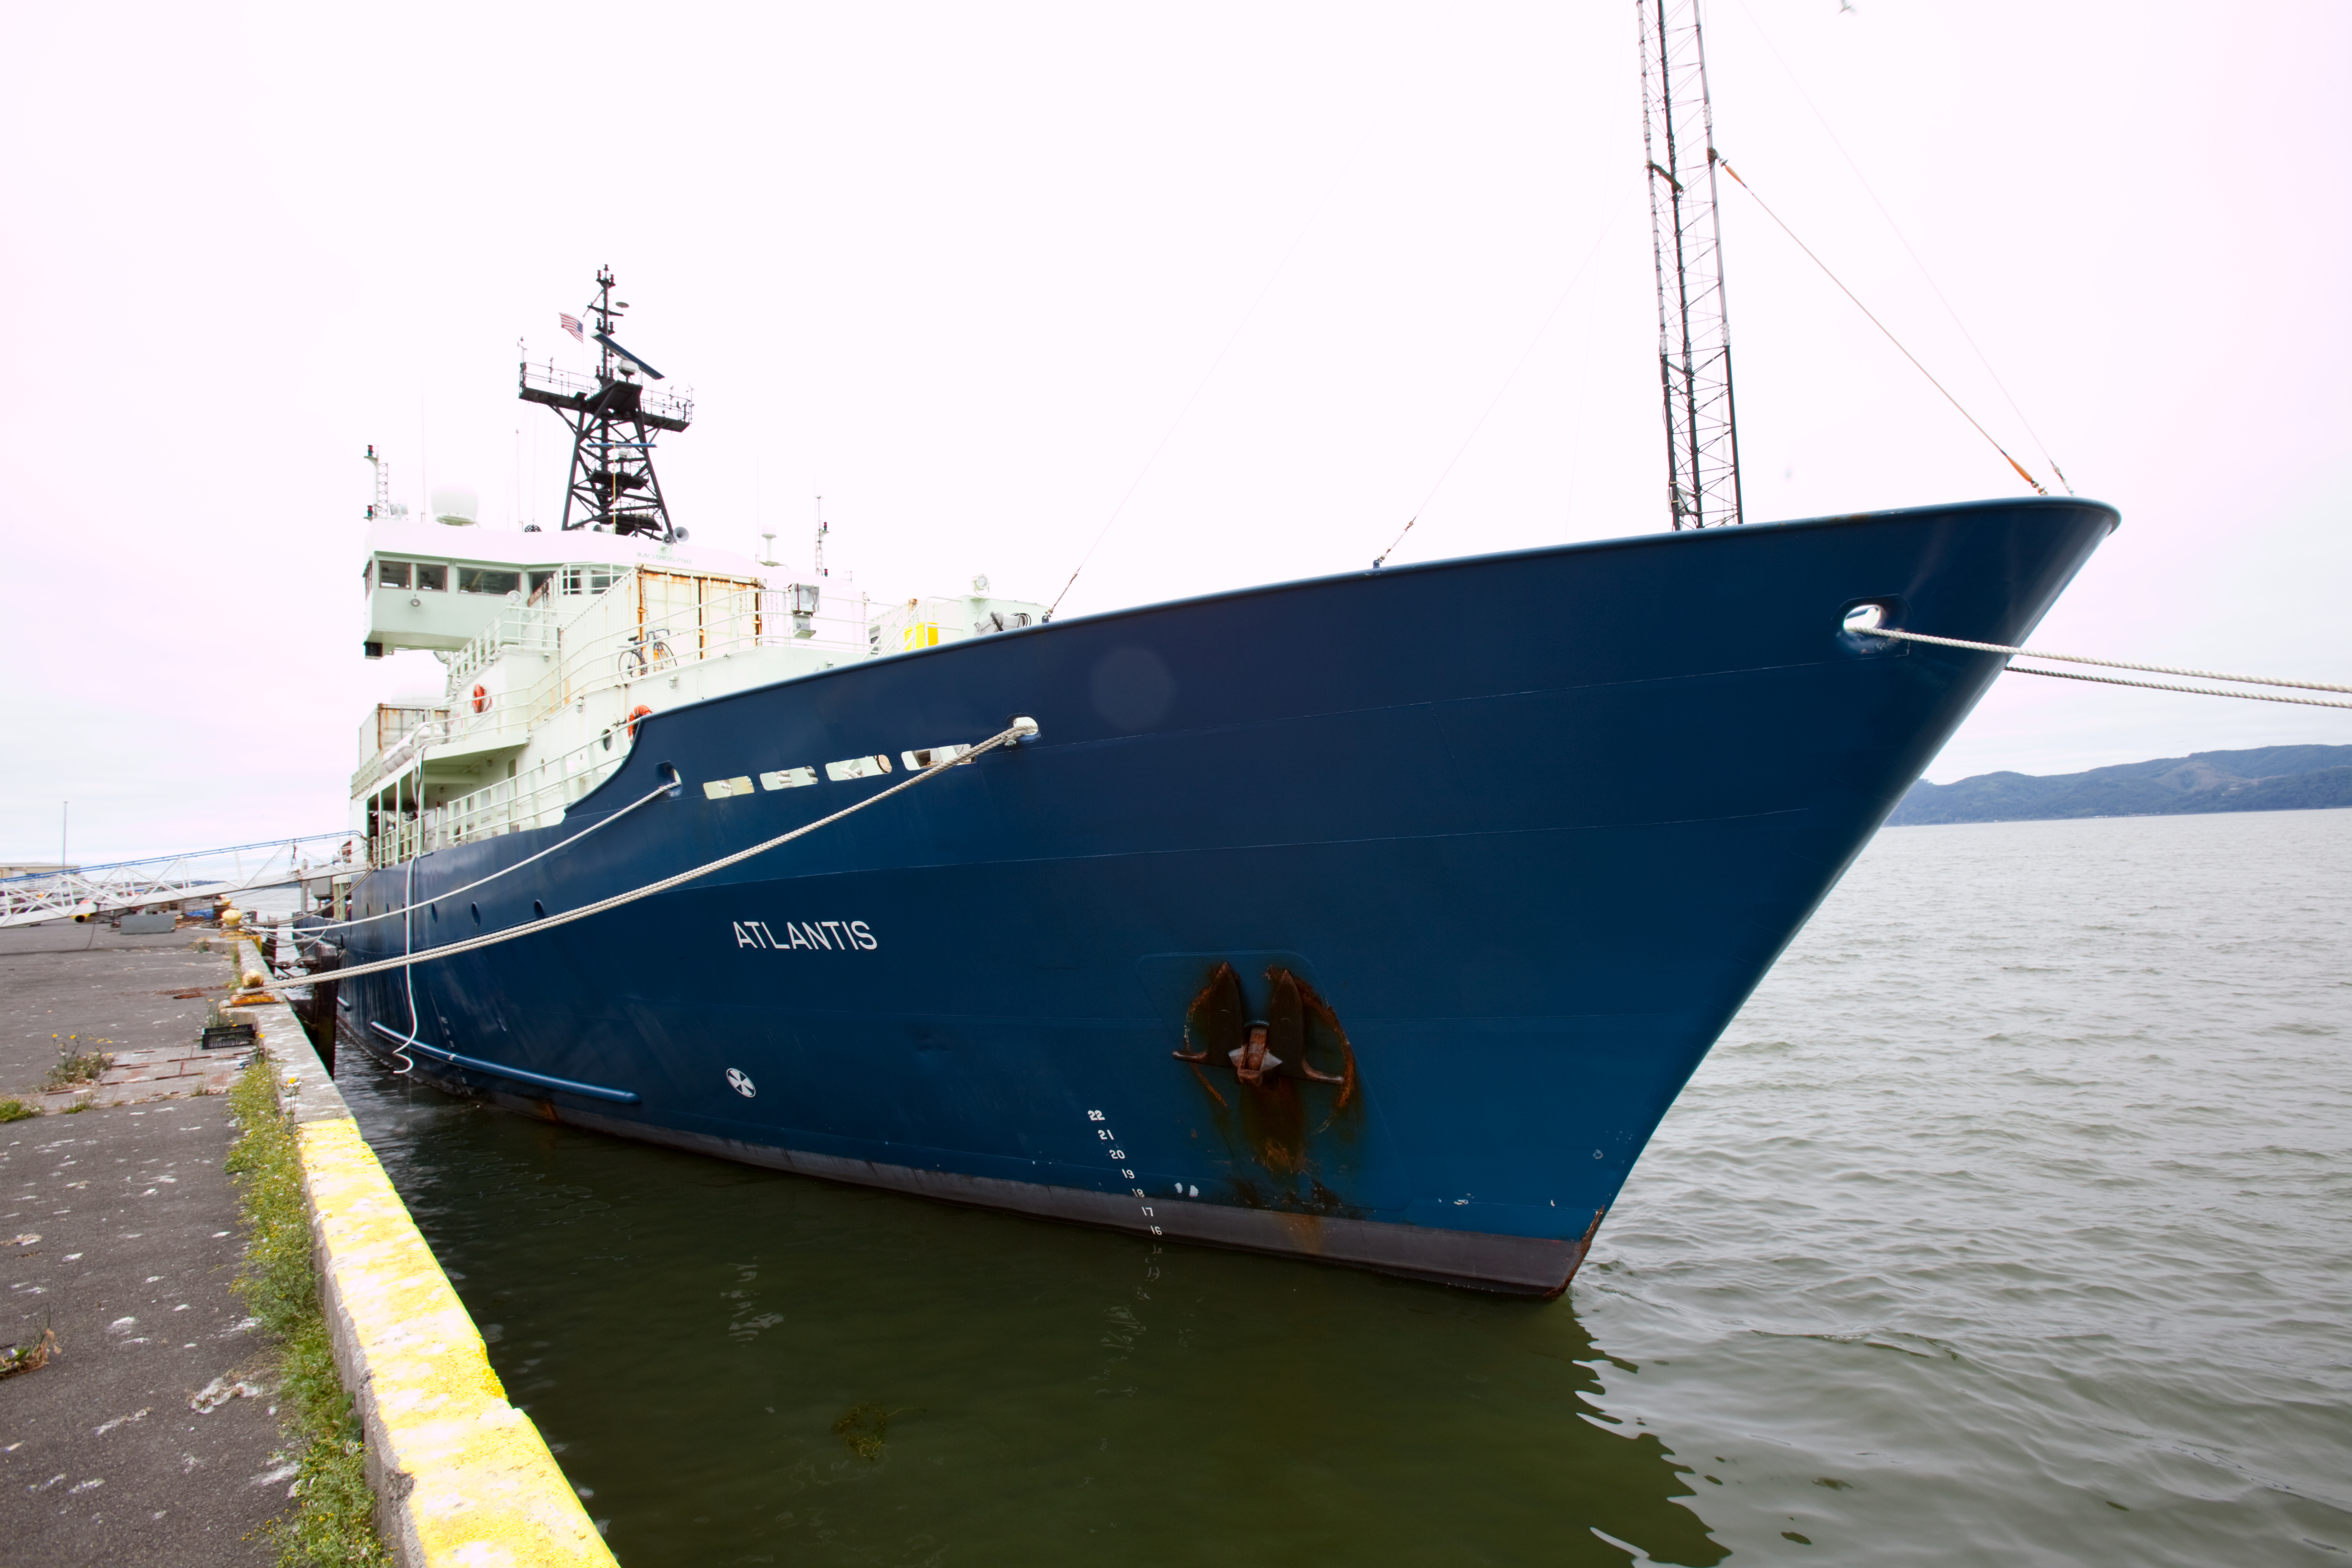 Marine research vessel on the water